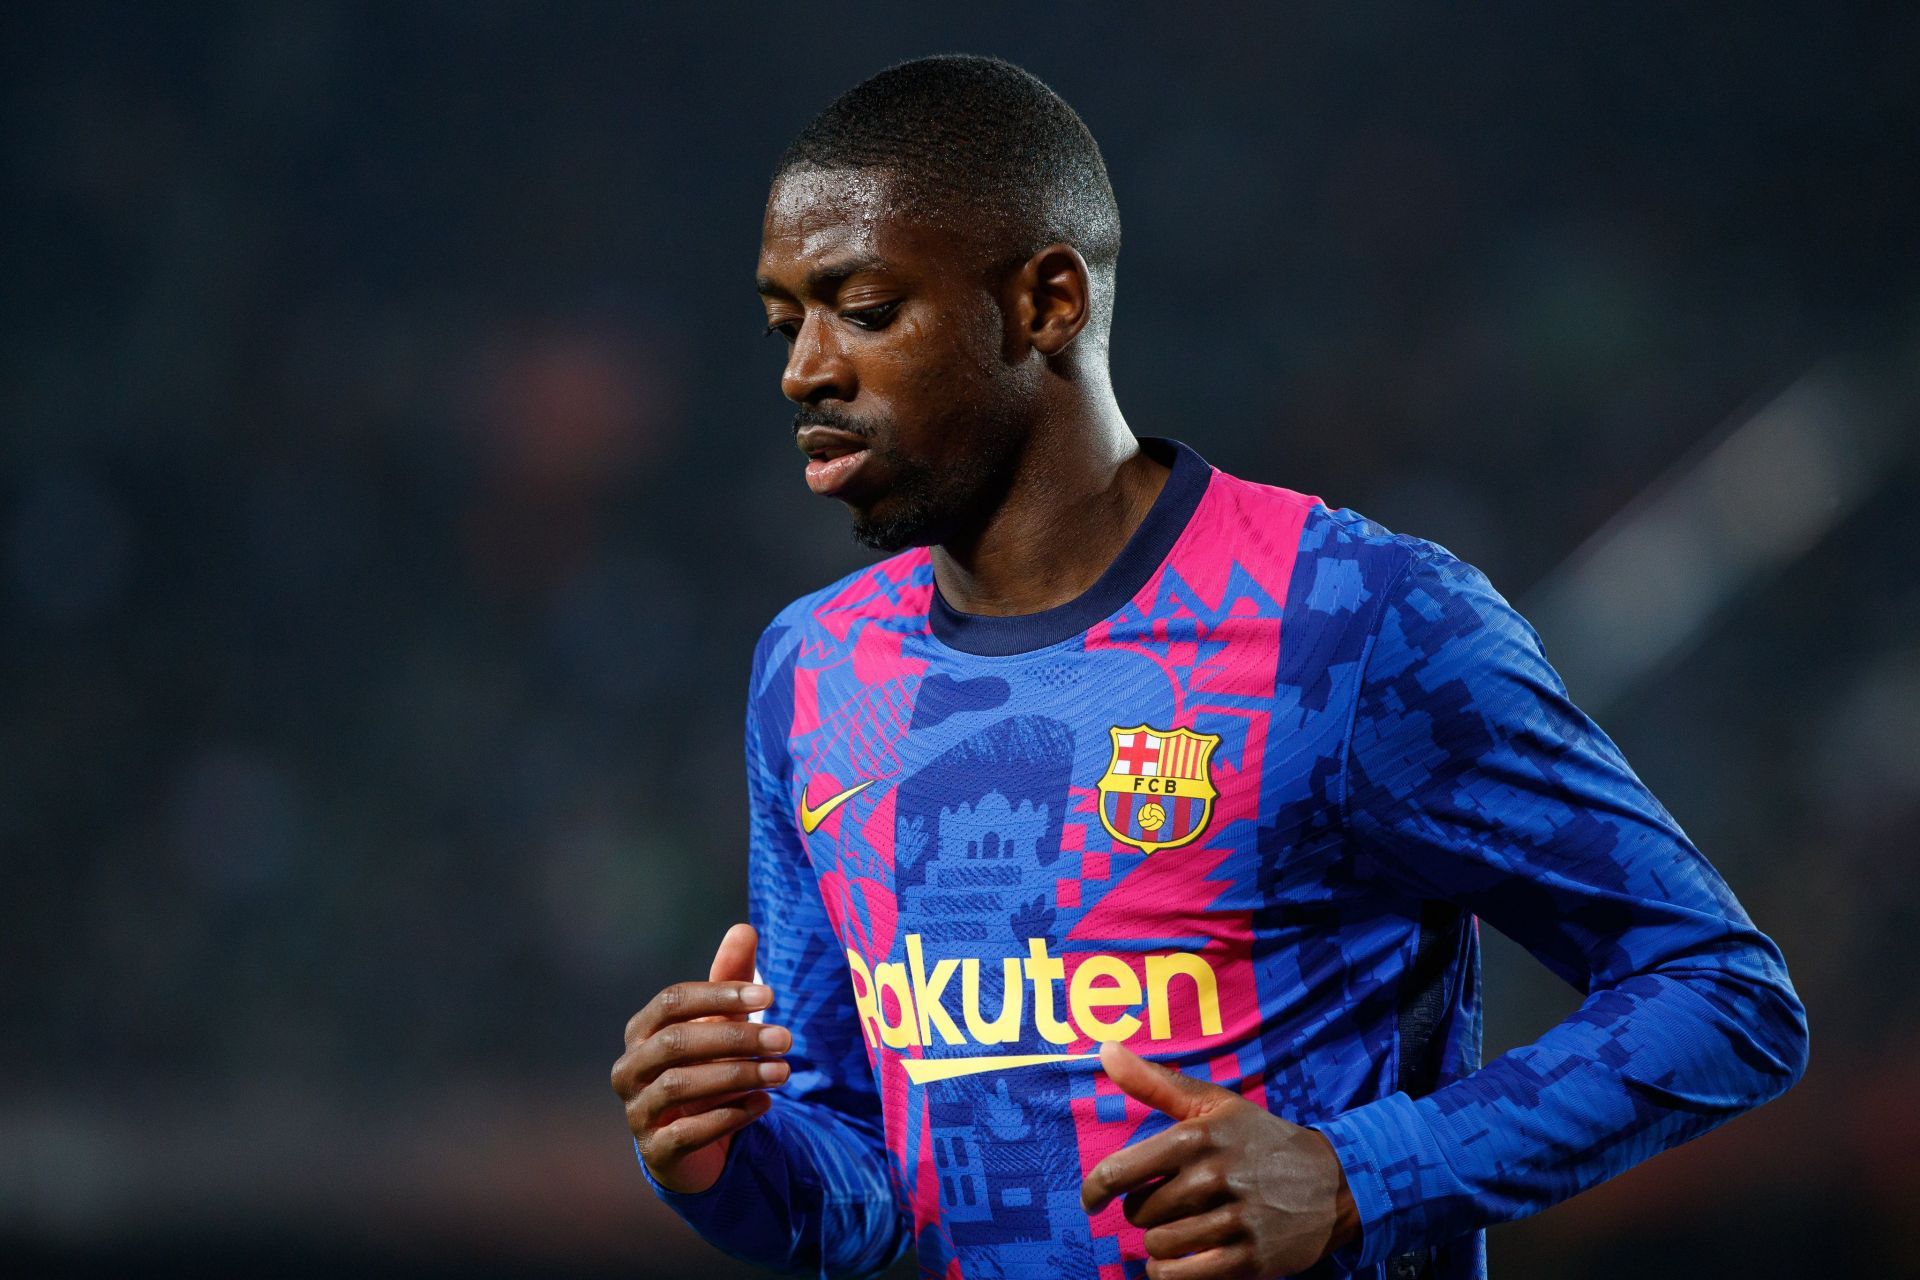 Ousmane Dembele is one of Barcelona&rsquo;s most in-form players at the moment